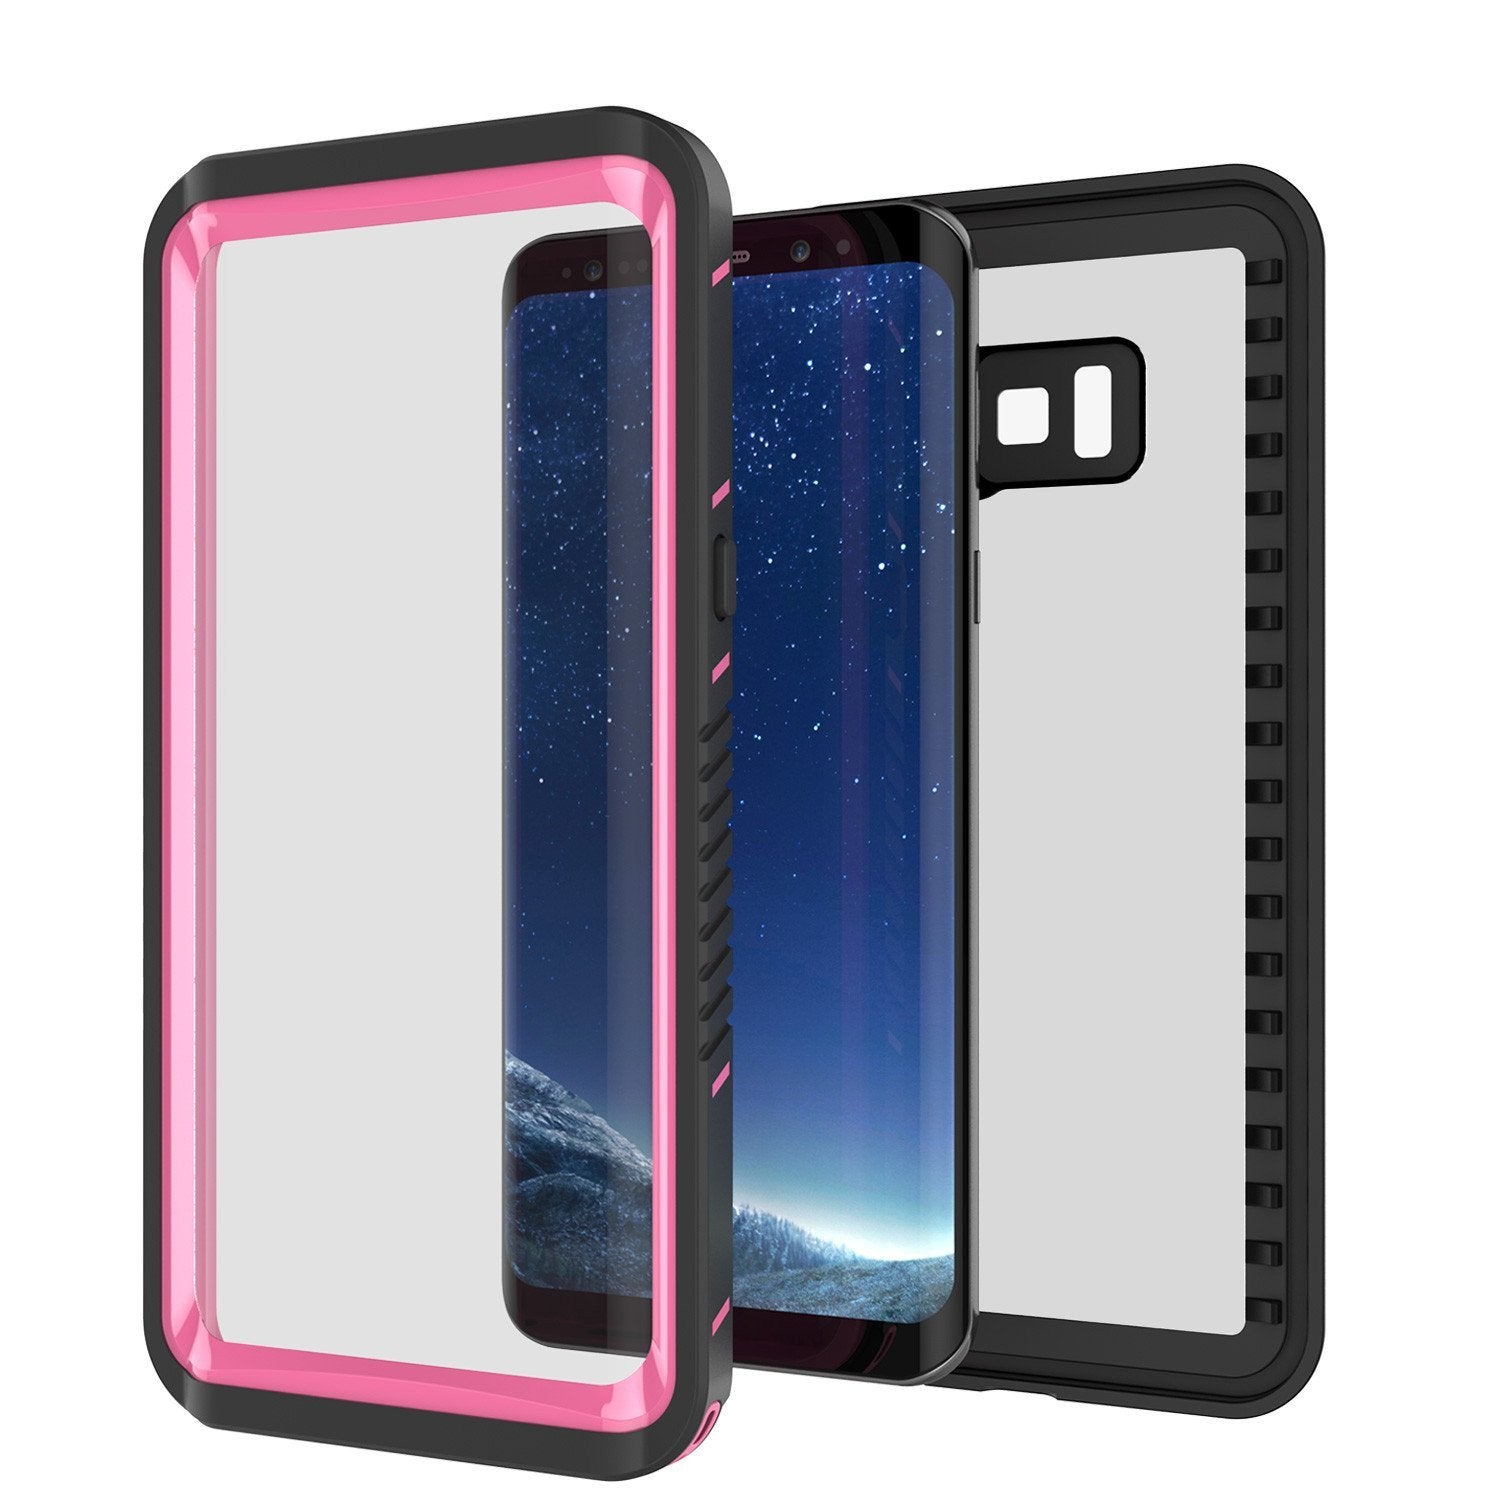 Galaxy S8 Punkcase [Extreme Series] Slim Fit Armor Cover [Pink]